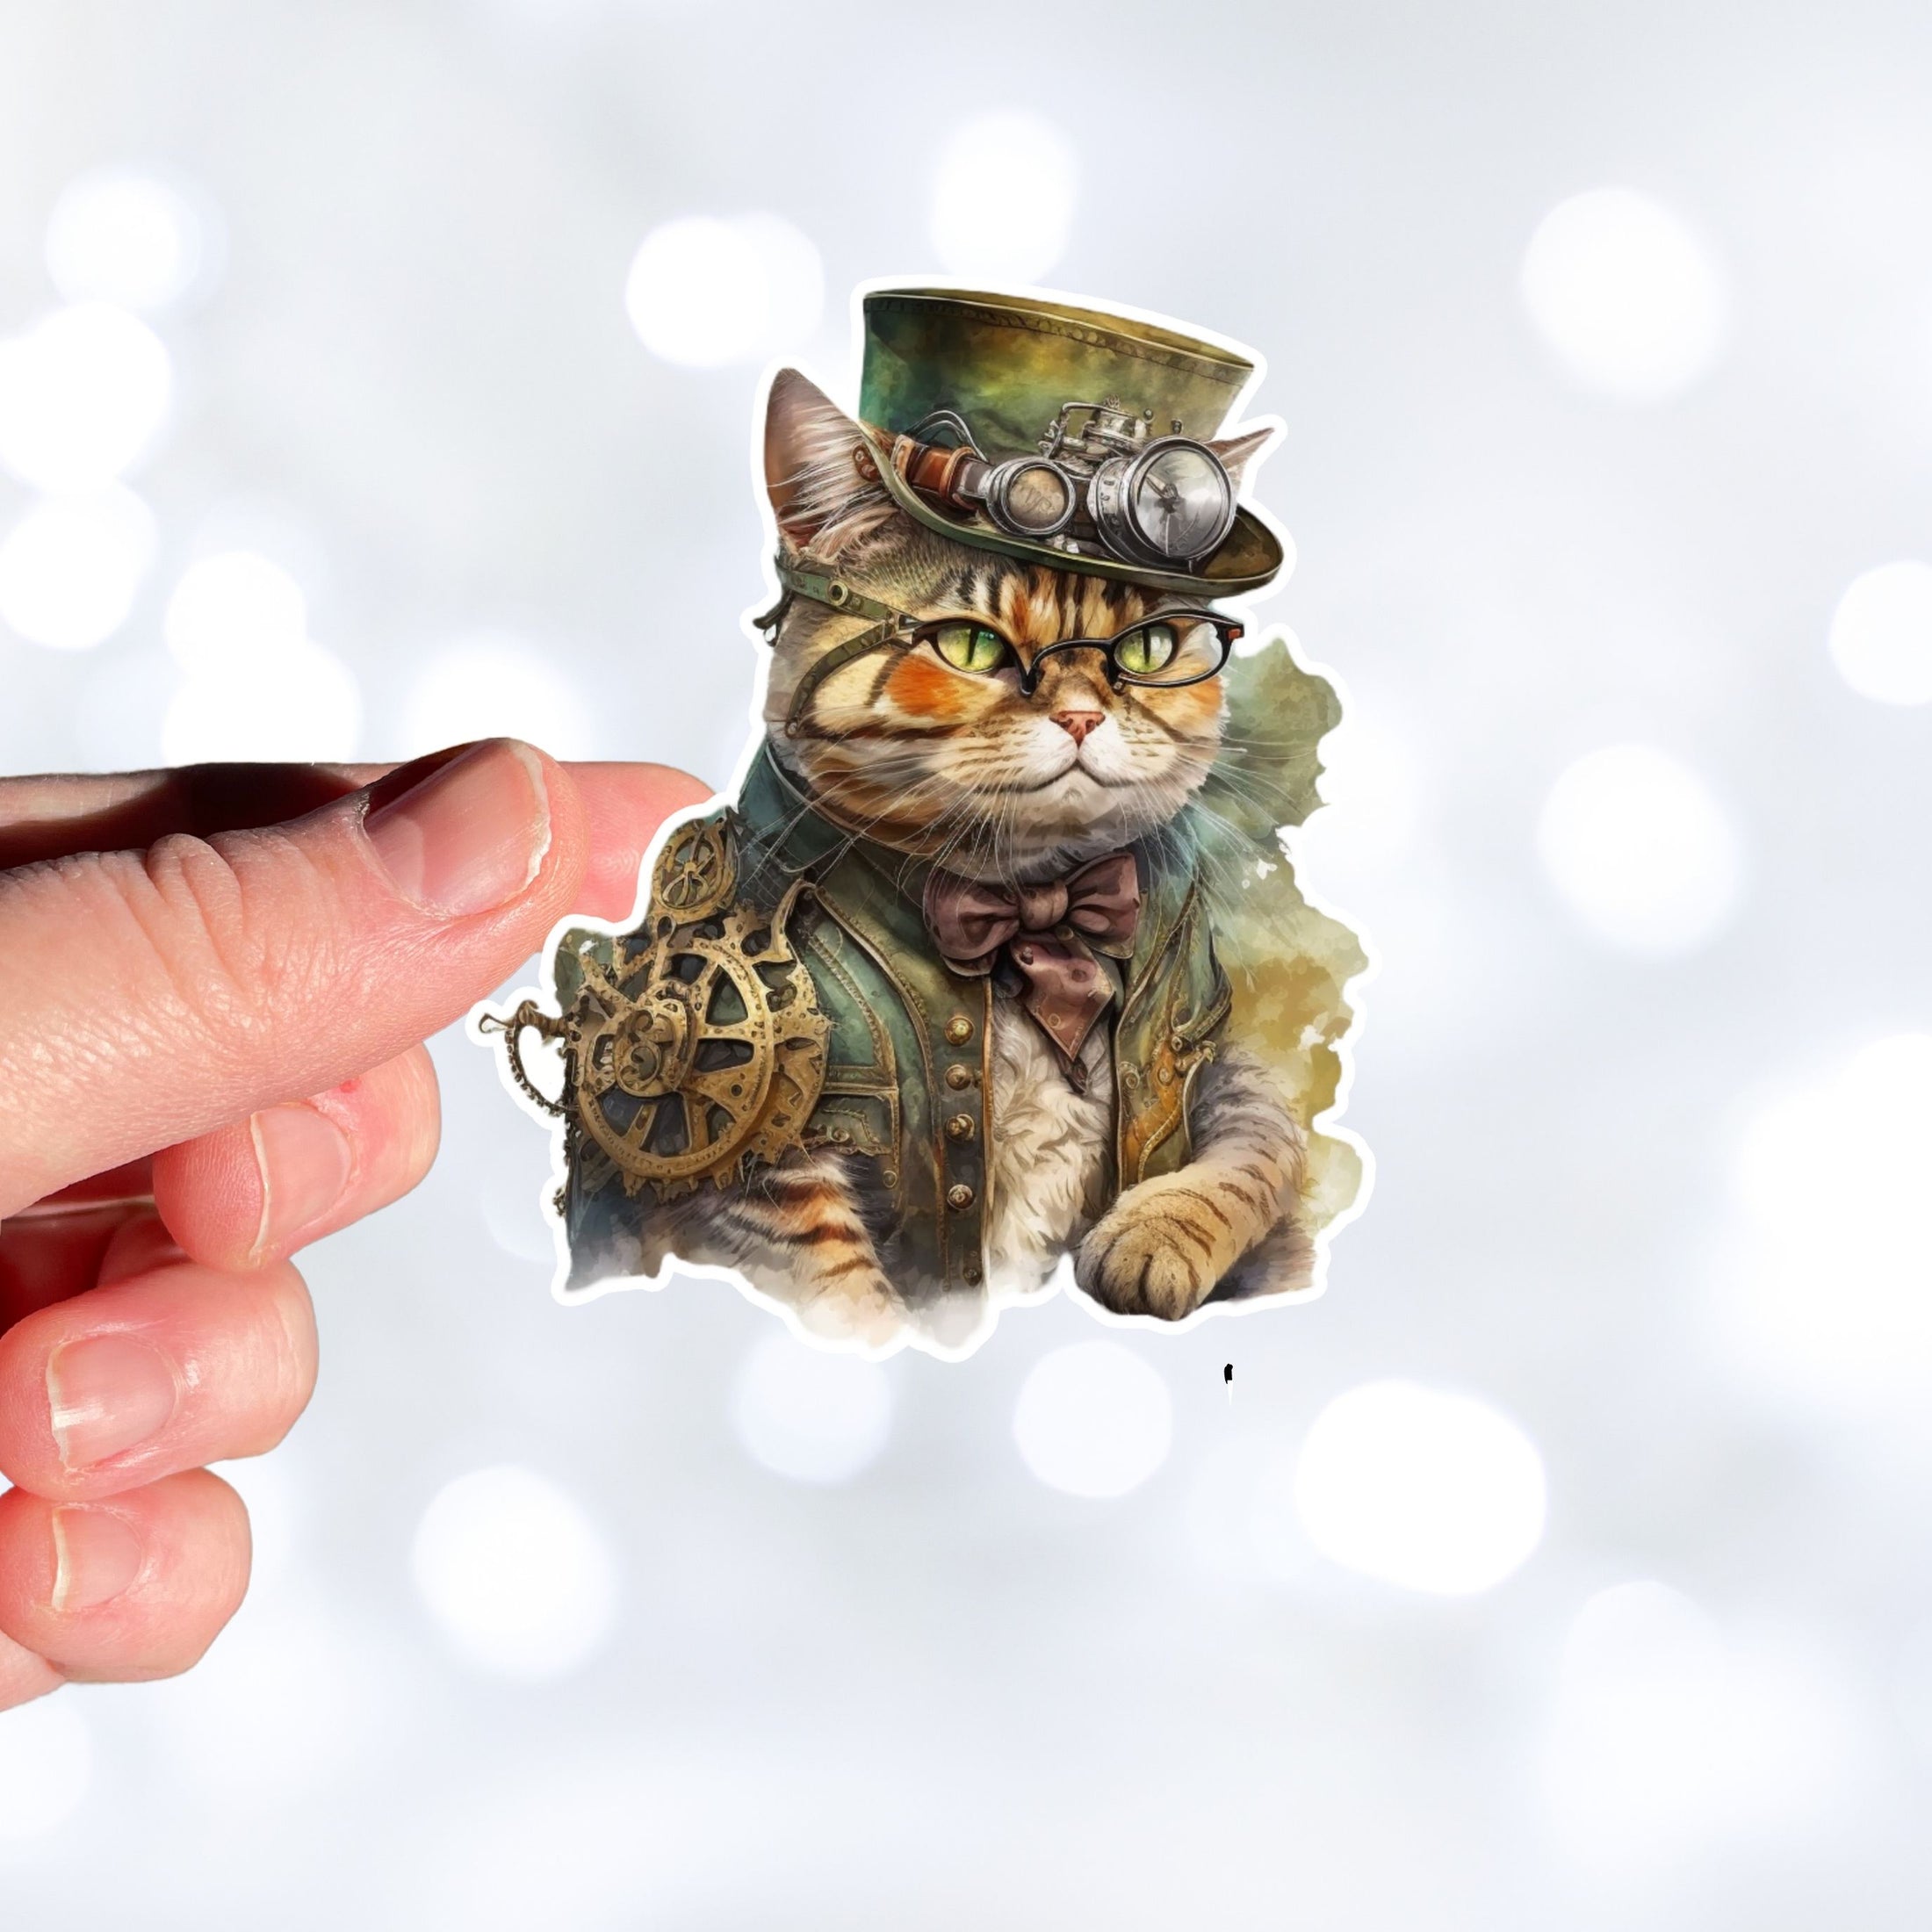 This image shows the steampunk cat sticker being held on a finger.